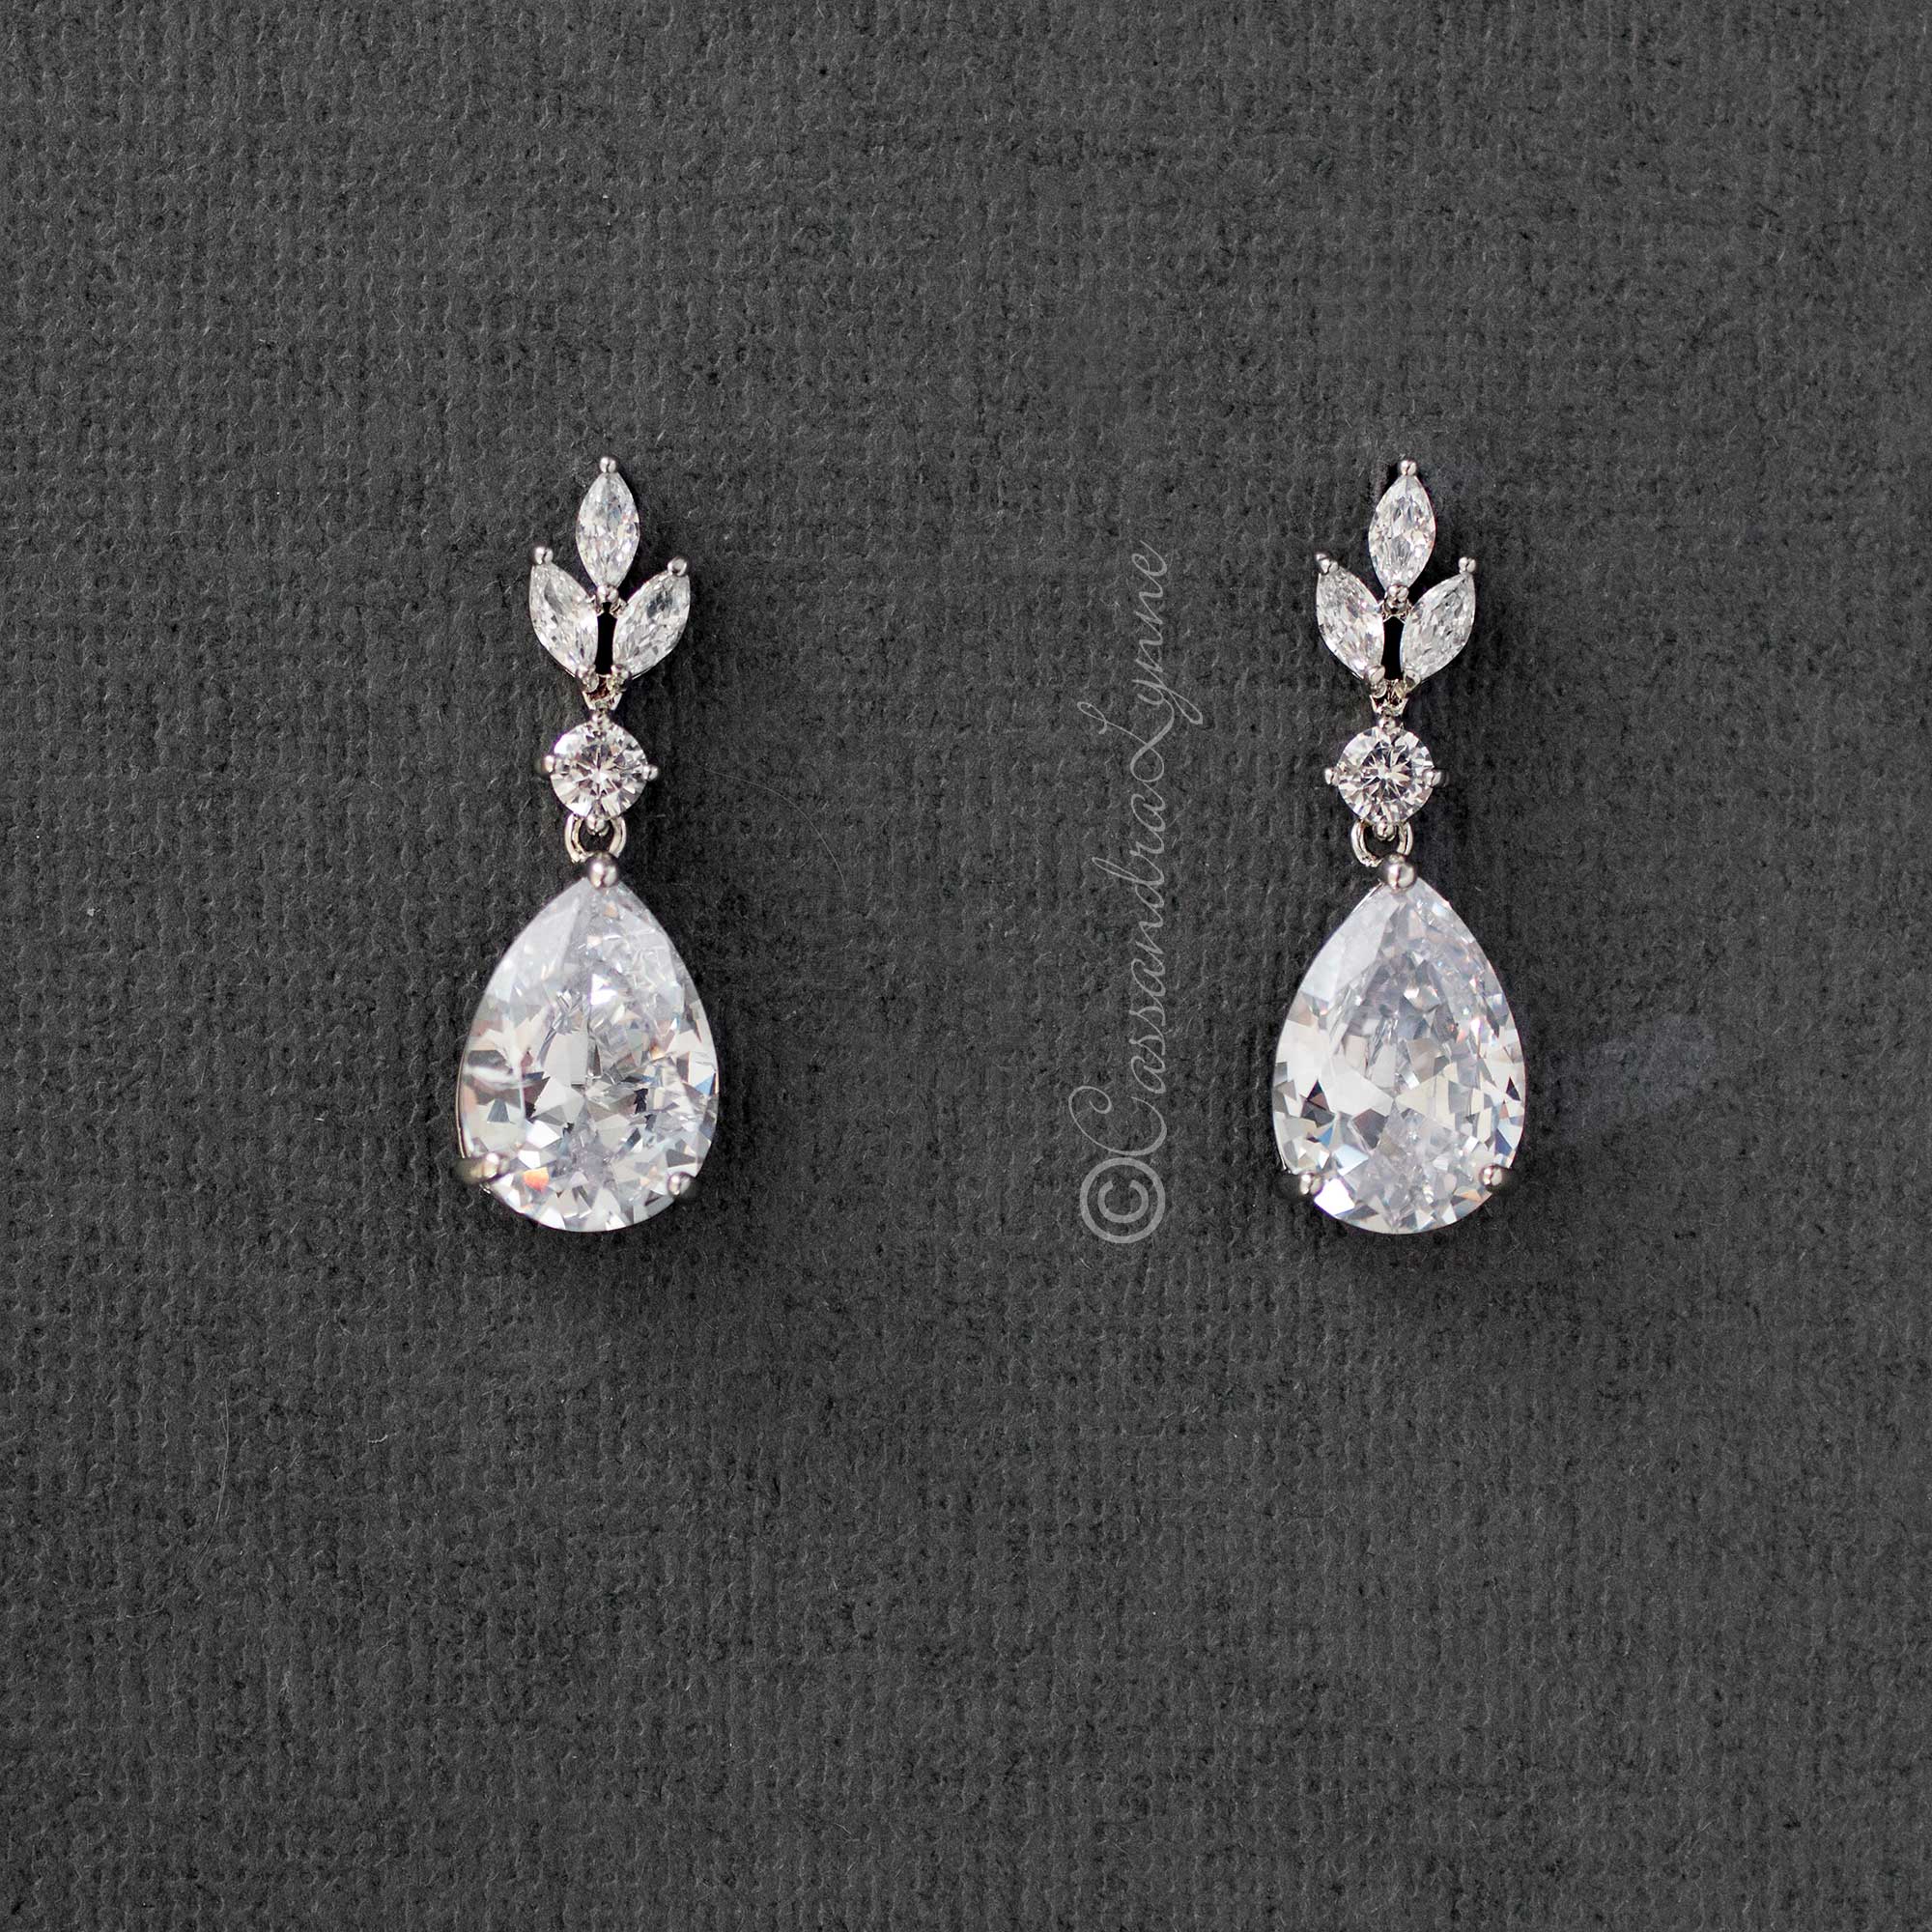 Wedding Day Bridal Earrings Cubic Zirconia and Pearl Page 3 - Cassandra ...